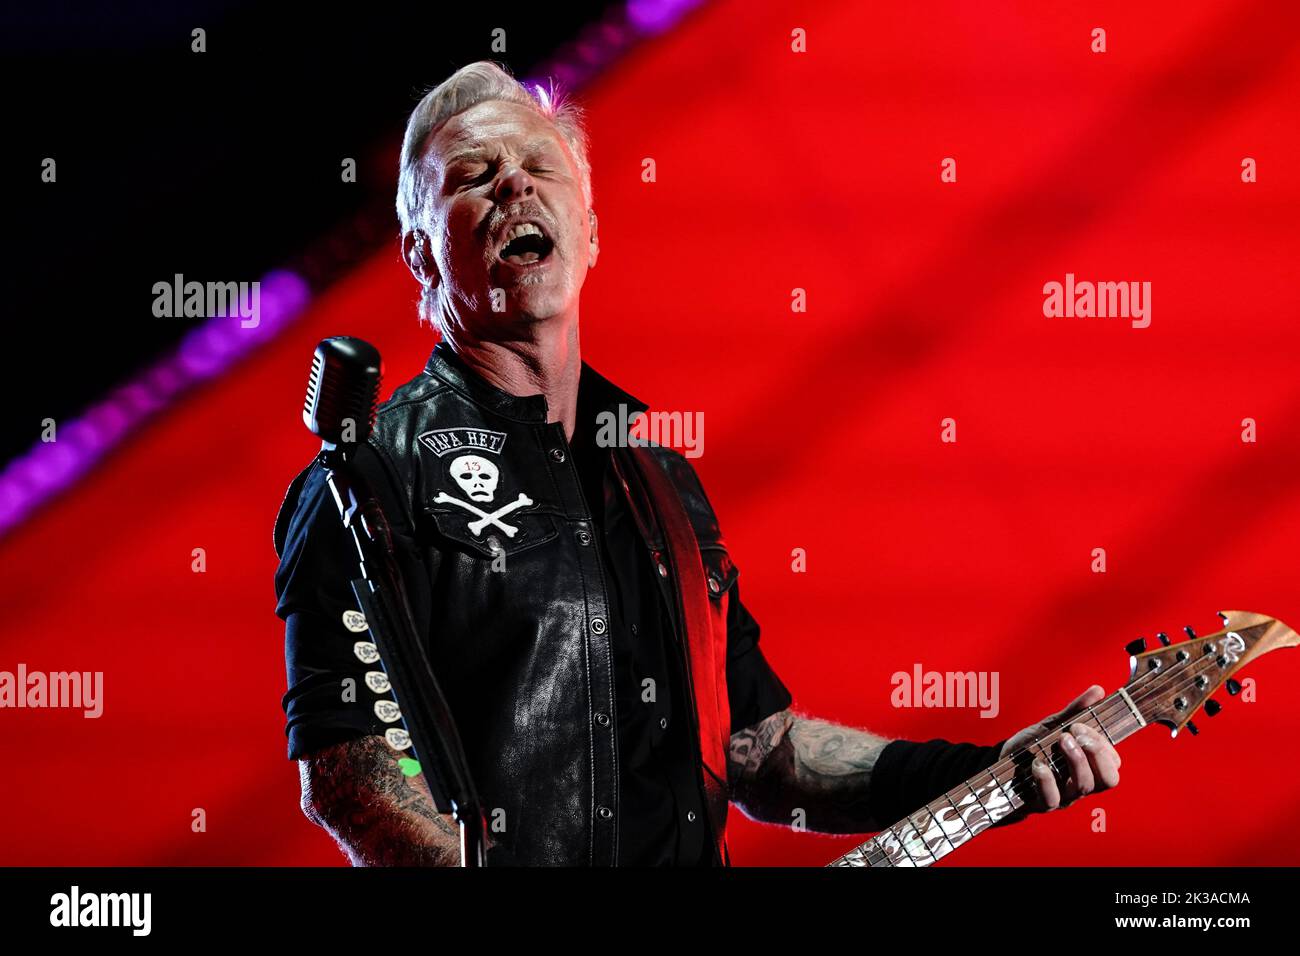 New York, NY - September 24, 2022: James Hetfield of Metallica performs at Global Citizen Festival NYC in Central Park Stock Photo